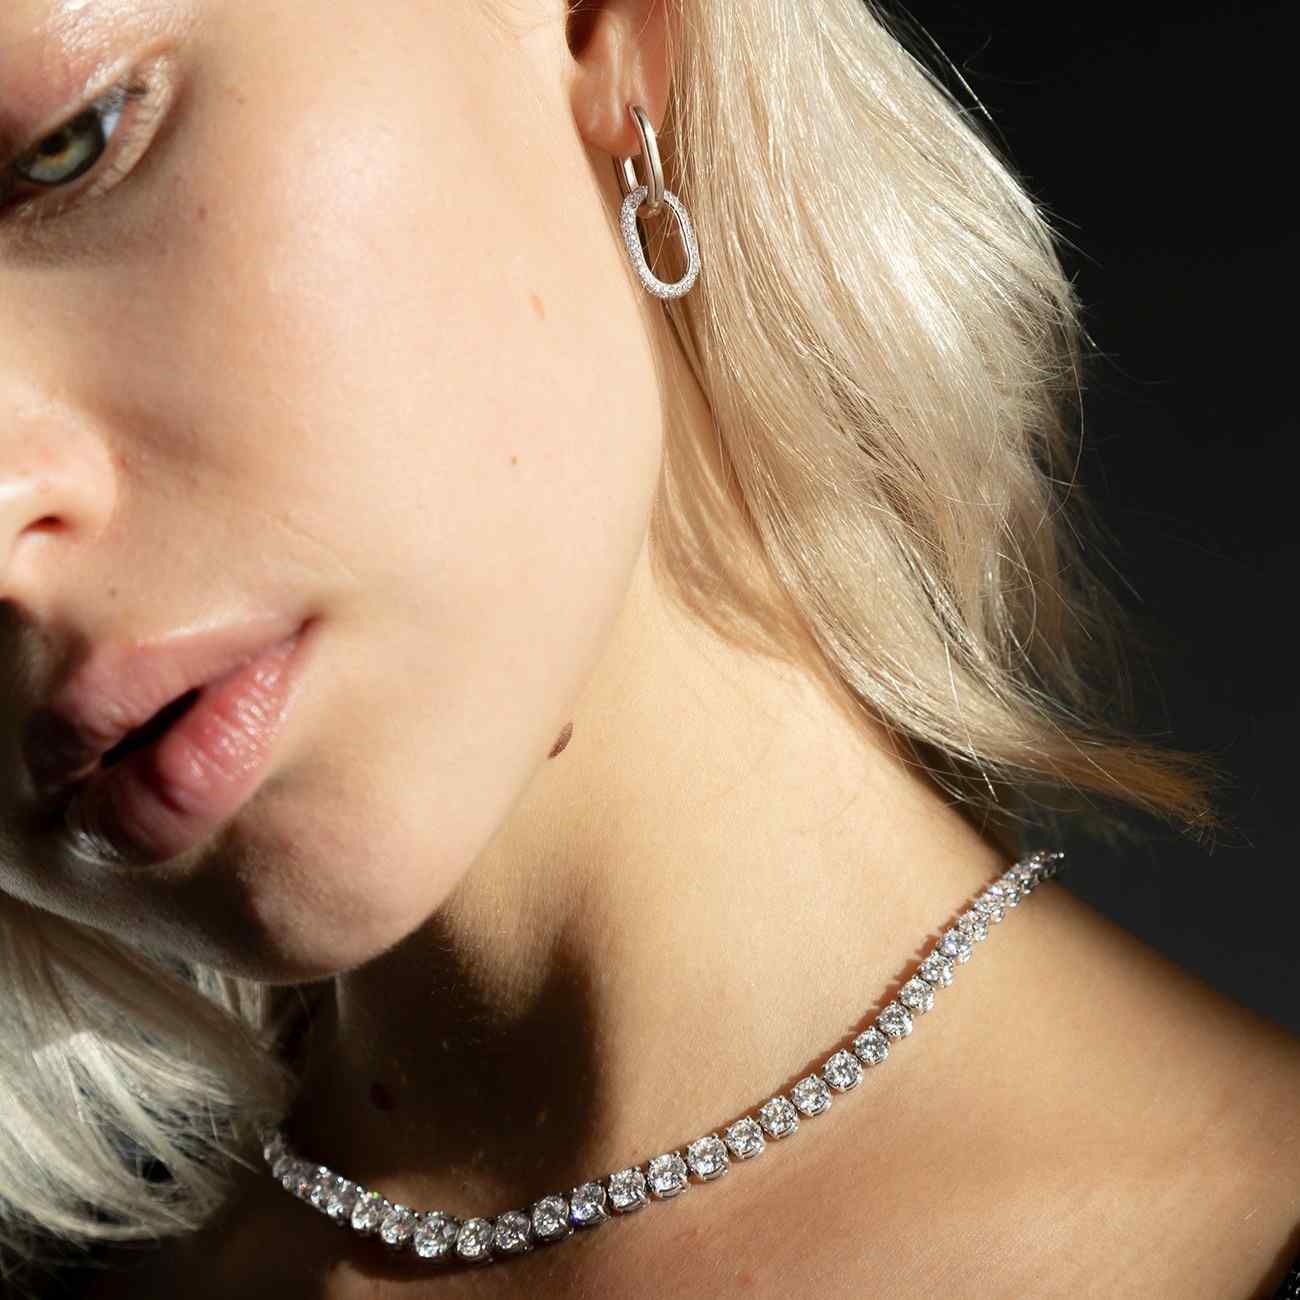 A model wears the Collier Rivière Tennis Necklace paired with the Dalliance Ecluse Earrings as an evening look. This 25ct graduated diamond tennis necklace features flawless round brilliants in a four prong solitaire setting. D-color, IF/VVS diamonds crescendo toward a center diamond of 1ct. The length of this striking piece is 16 inches (40cm).